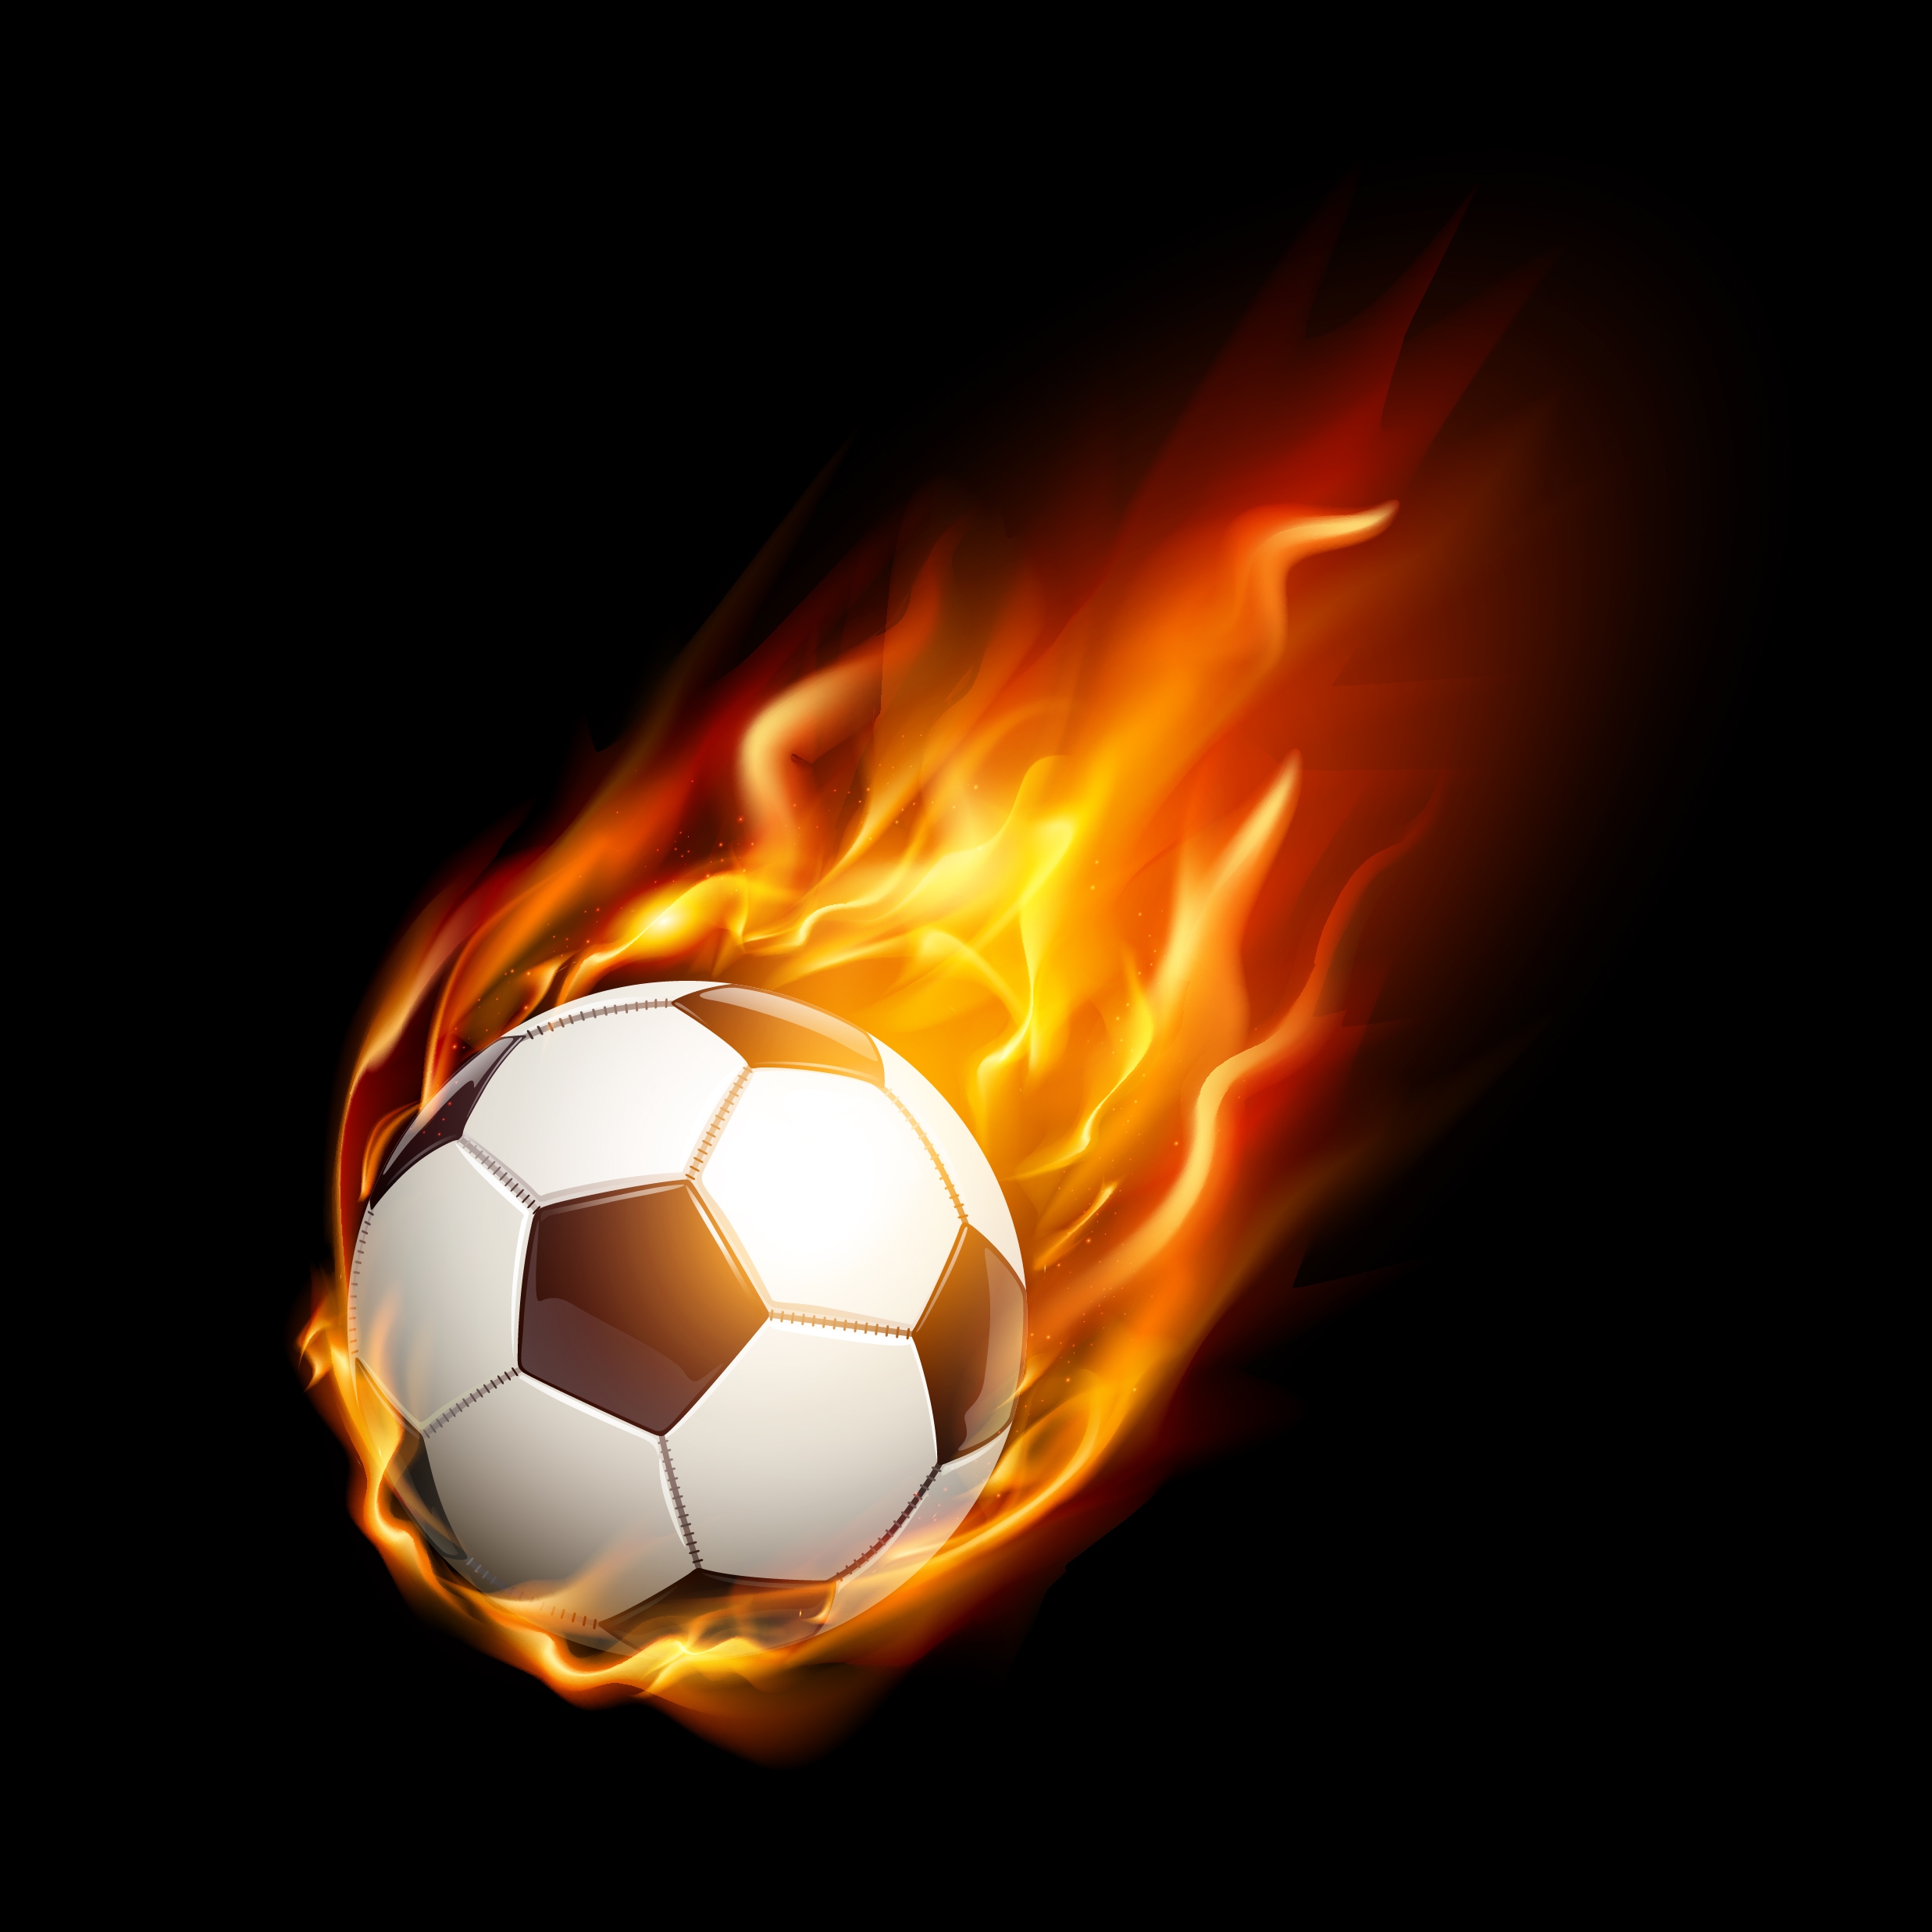 soccer background red fire ball icon realistic design